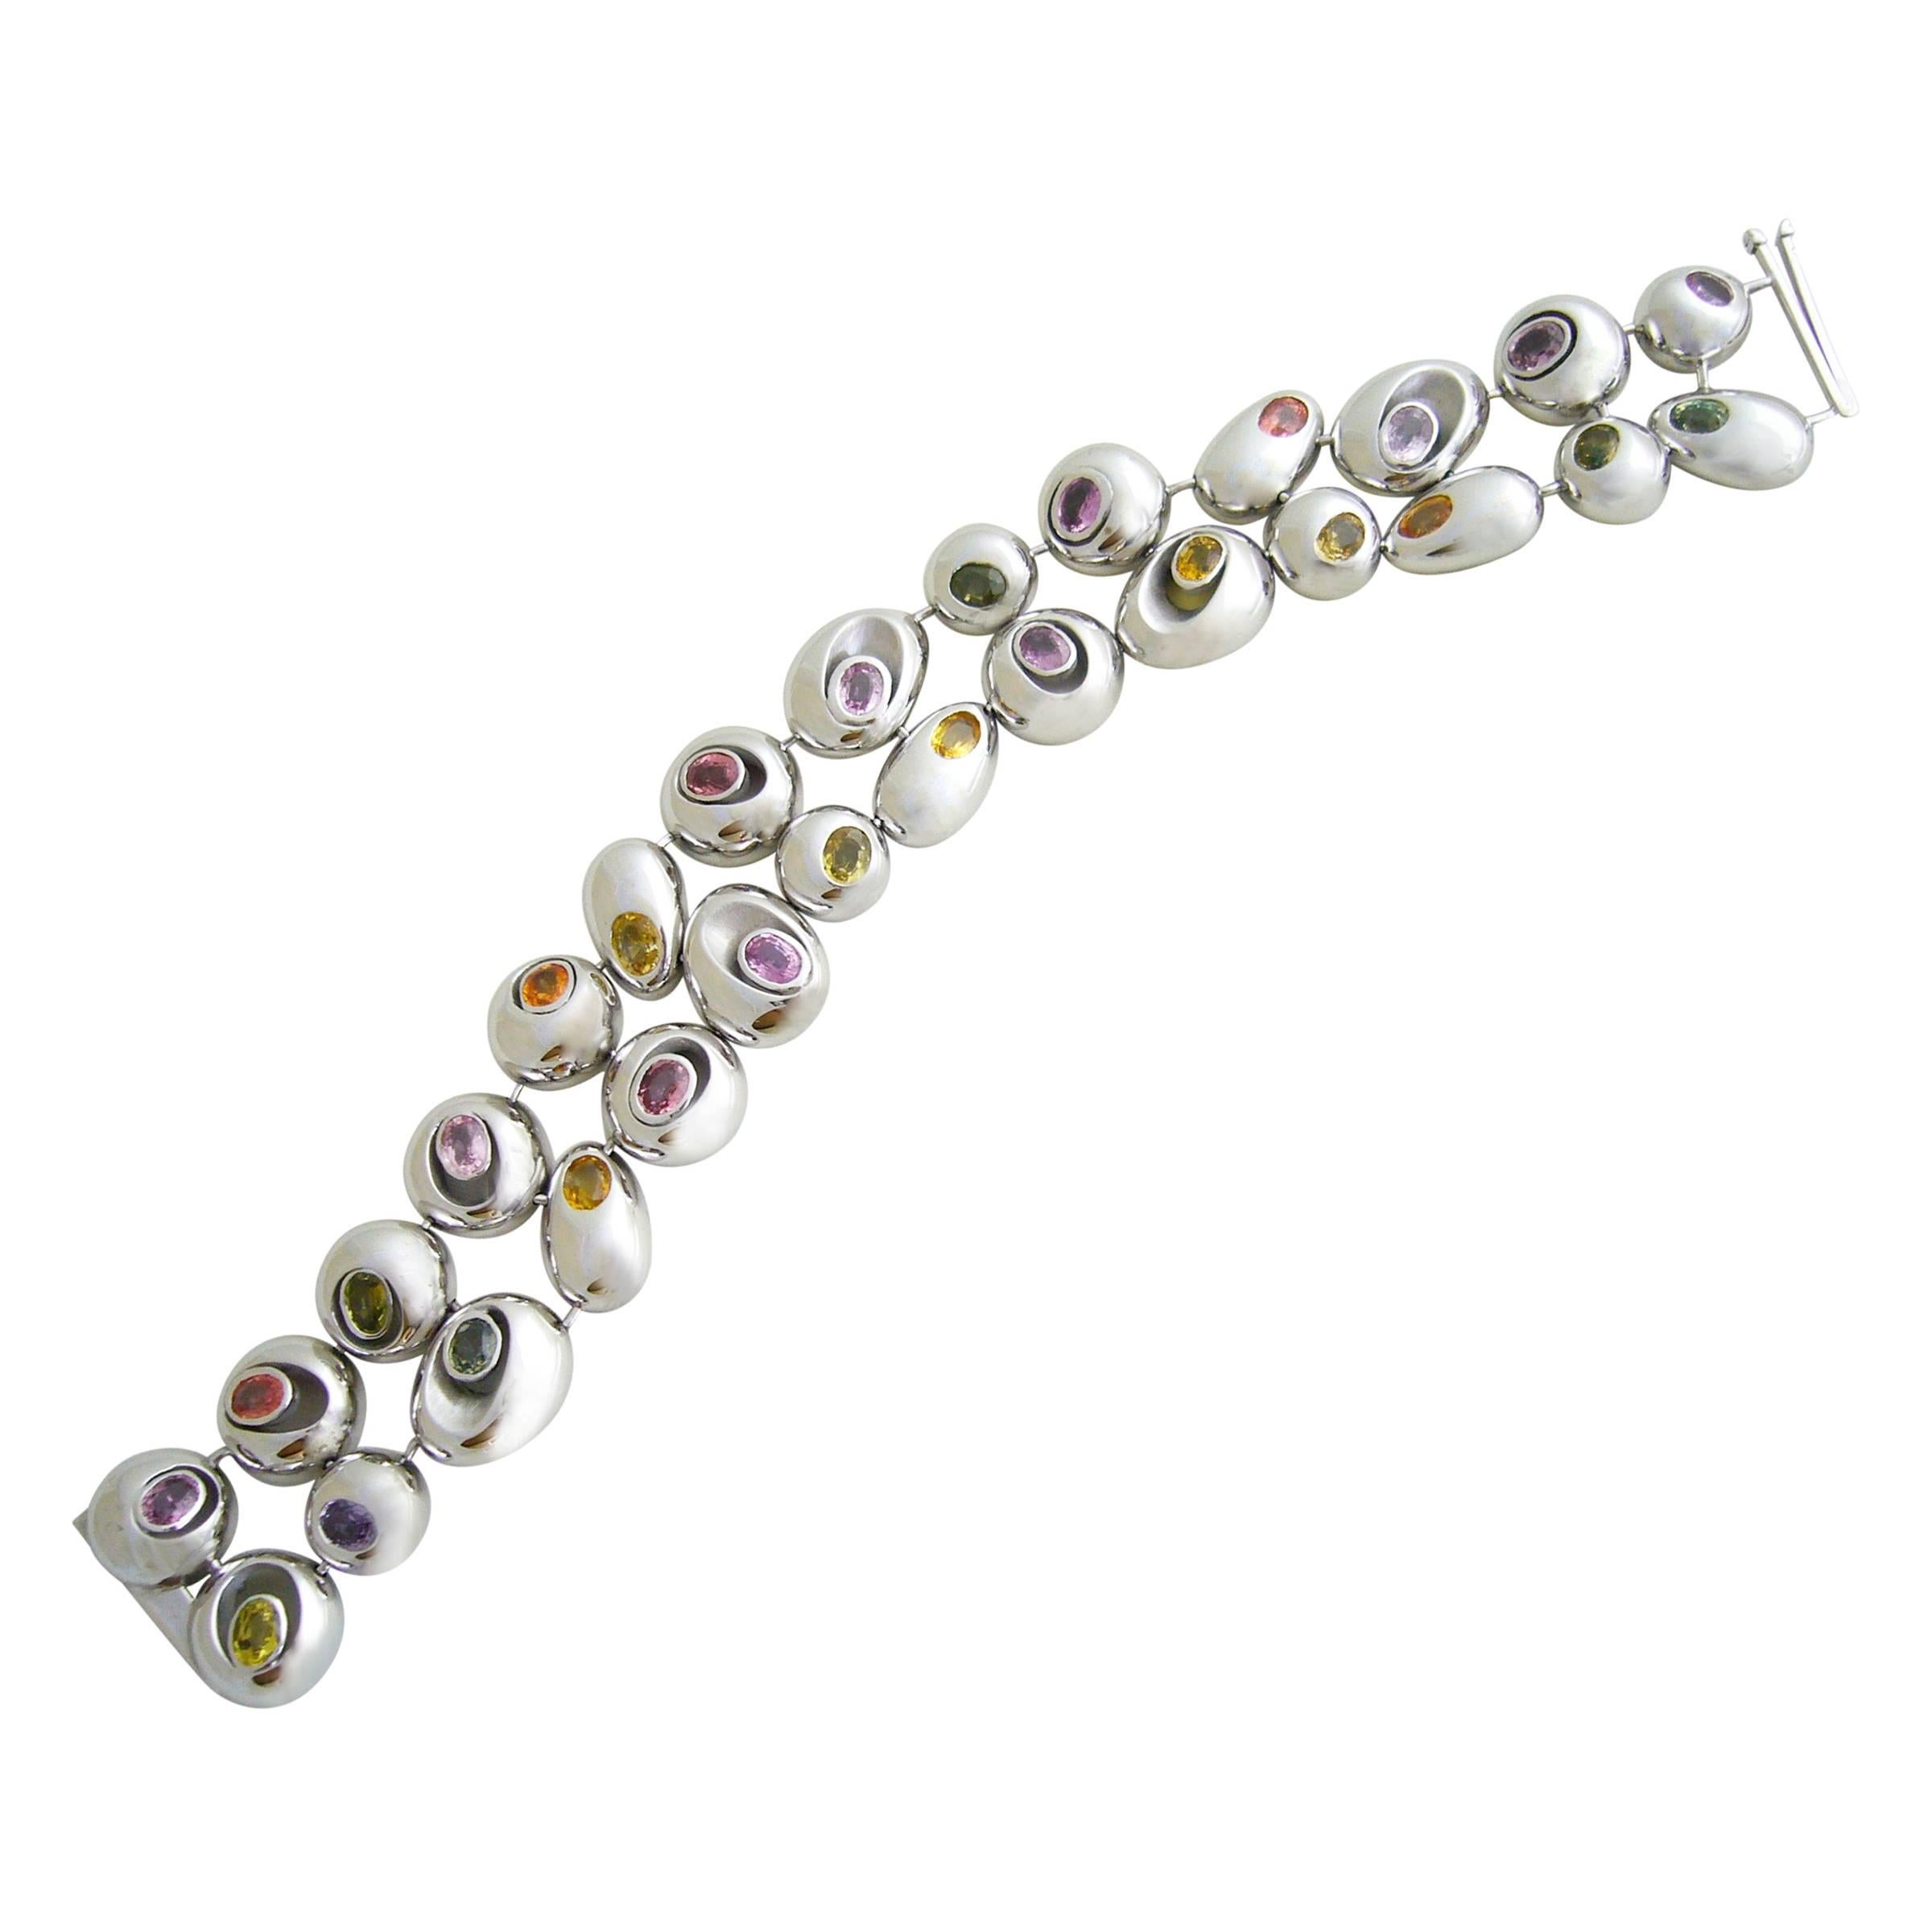 18k white gold and multicolored sapphire bracelet designed and created by Romain Saide, manufactured by Arnould Edition Paris, France. Saide was a designer for Arnould from 1988 thru 2009 and also a free lance designer for many exclusive brands of